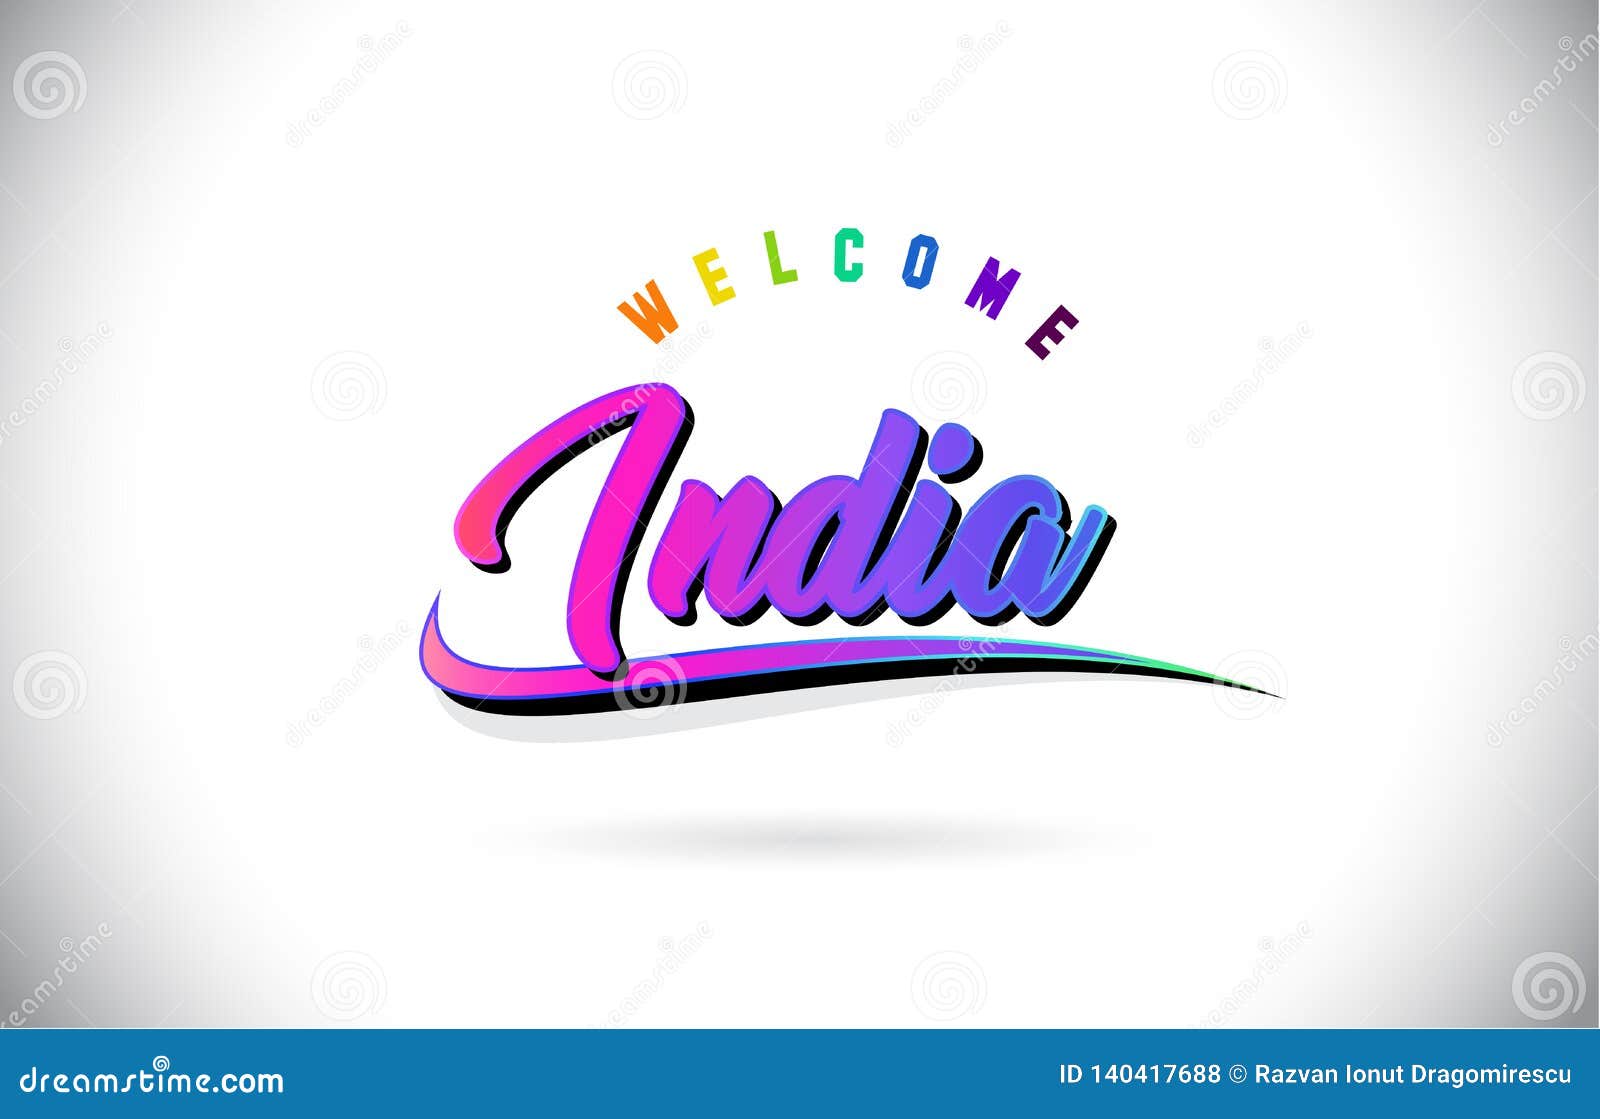 40 Word Ind Images, Stock Photos, 3D objects, & Vectors | Shutterstock